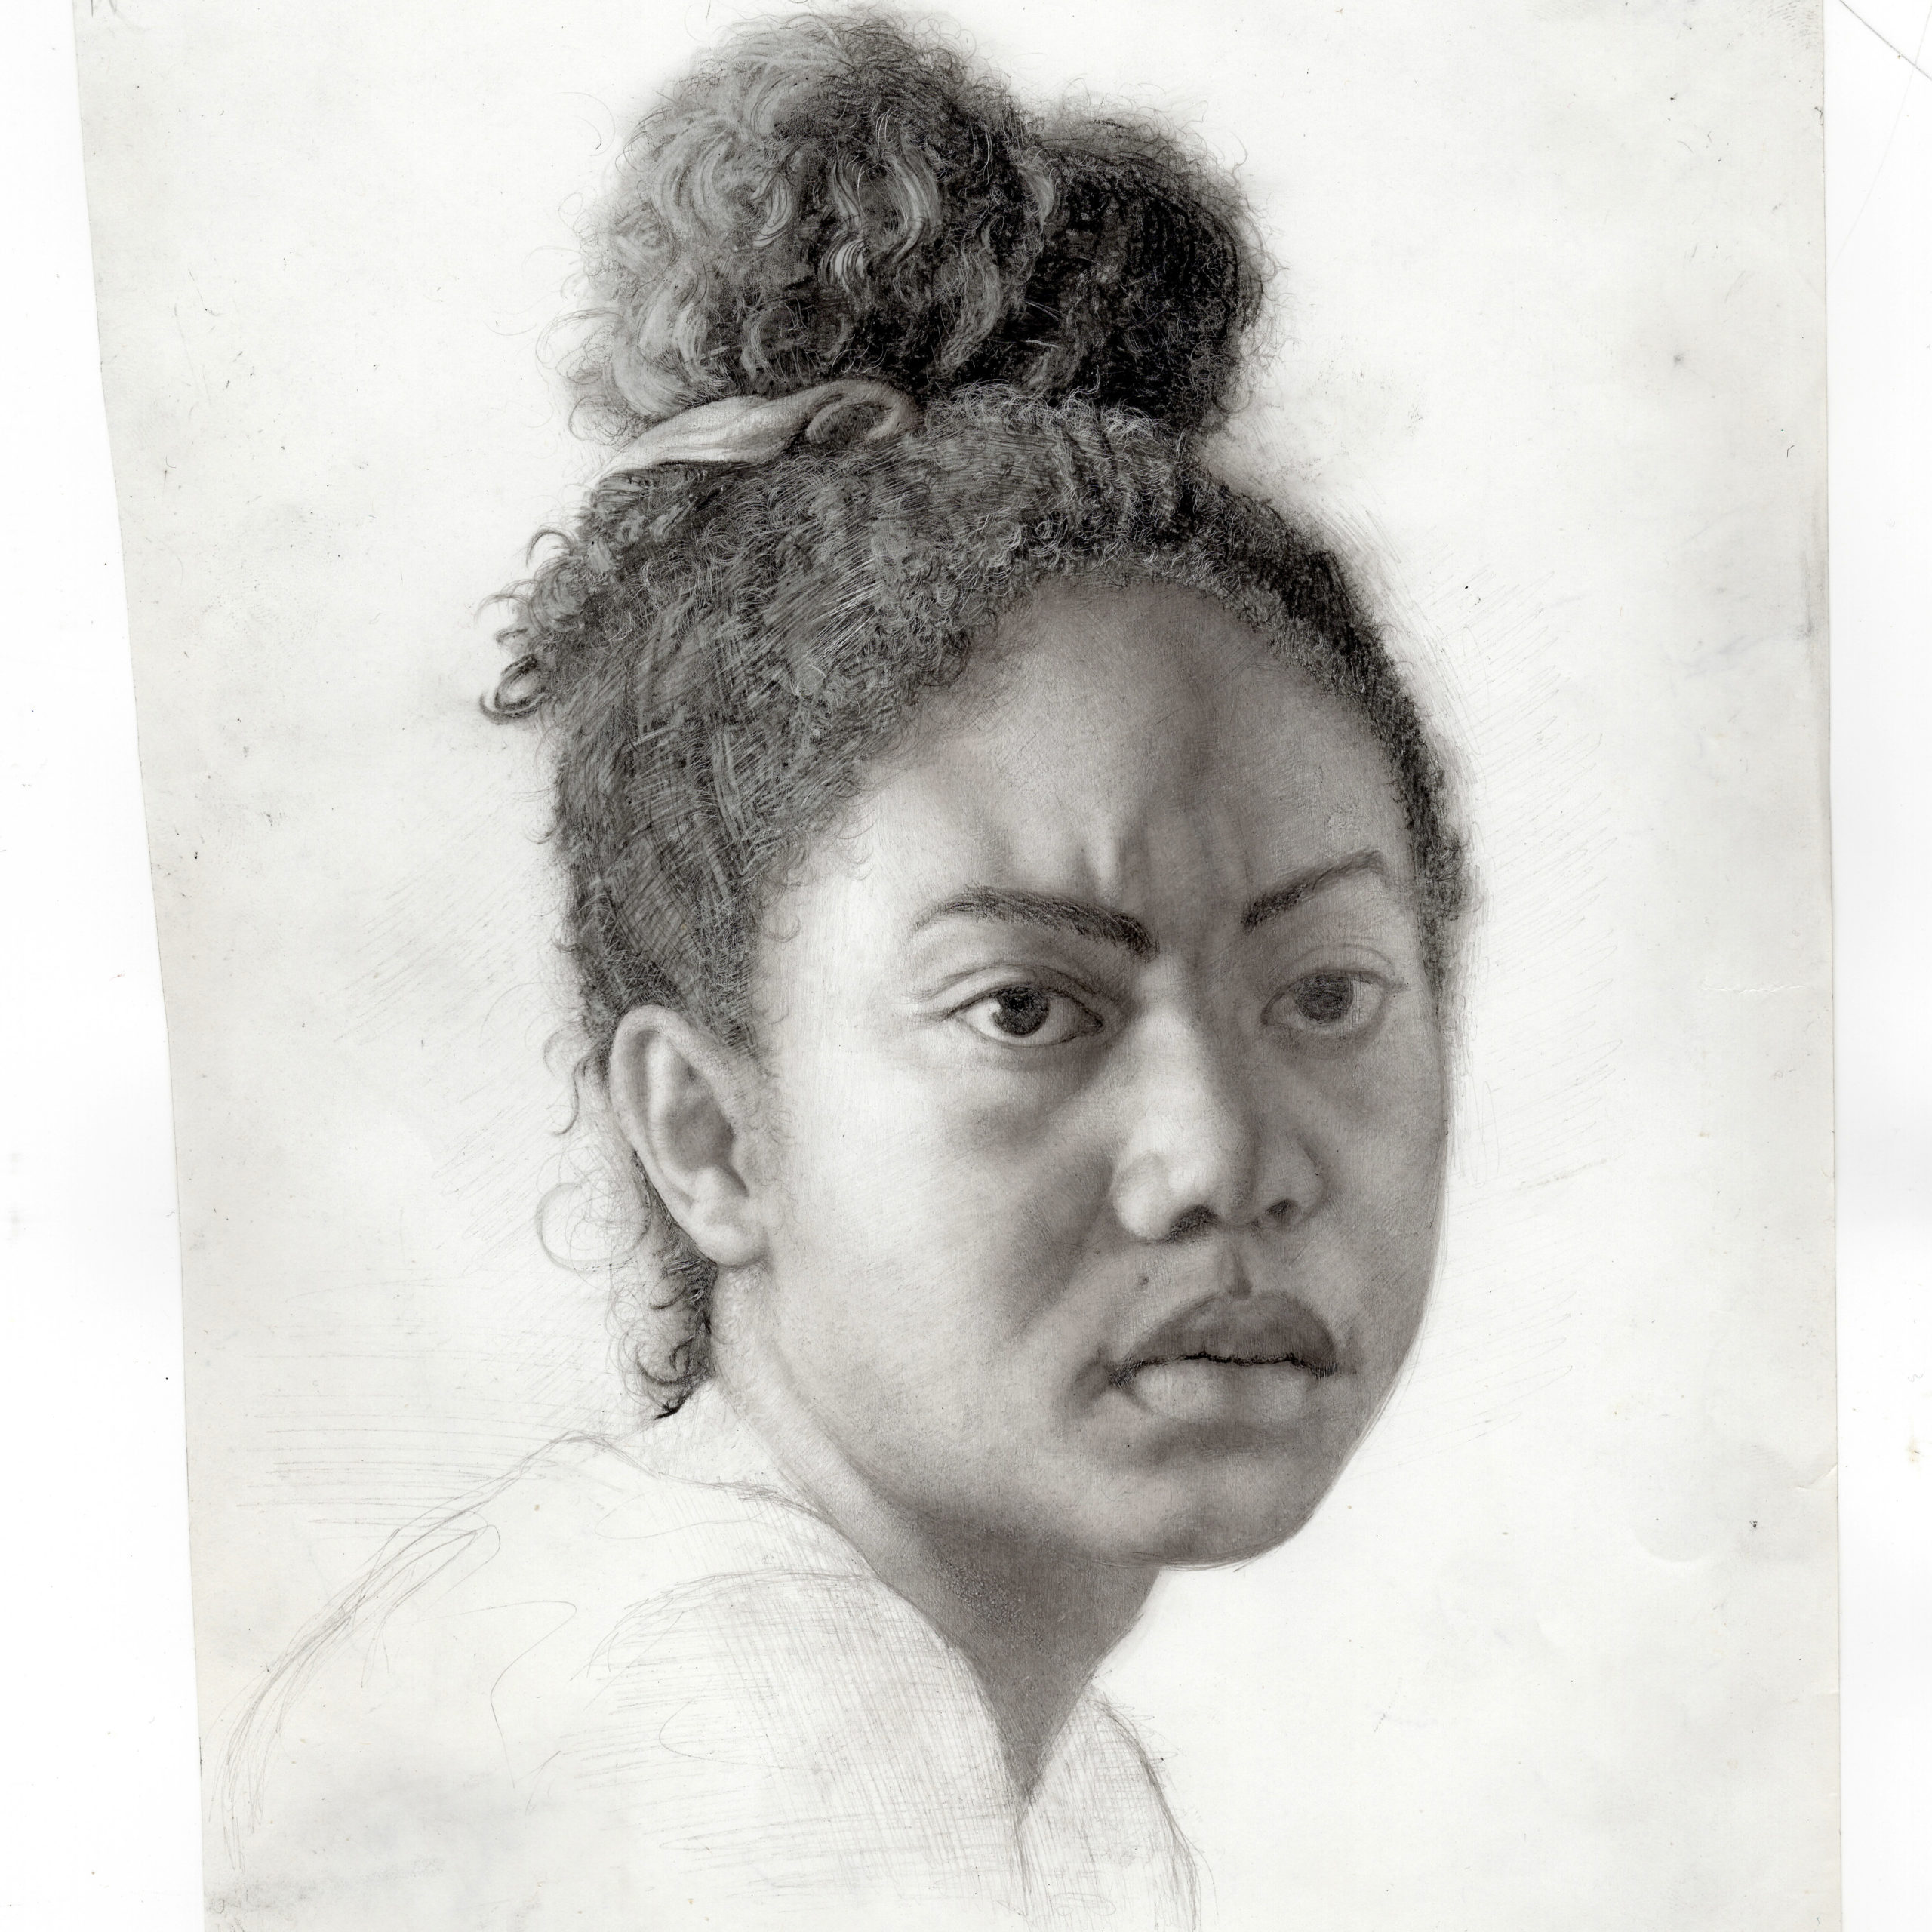 Contemporary realism portrait drawings